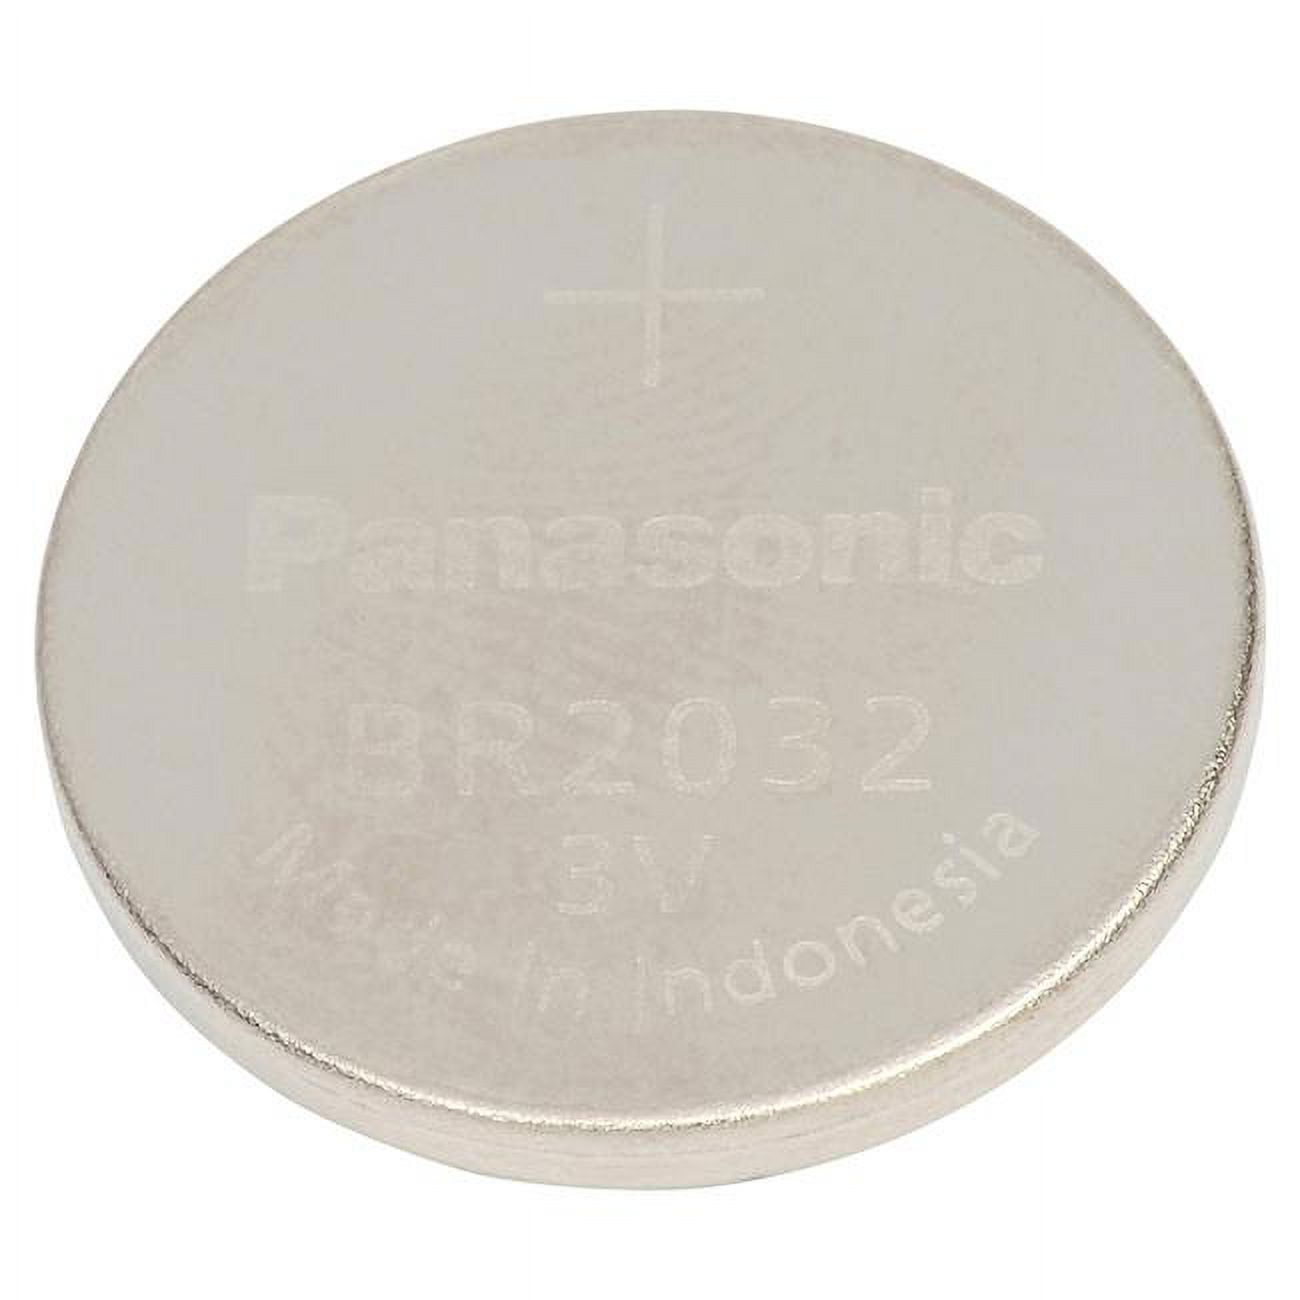 COMP-141 3V & 190 mAh Replacement Lithium Battery for BR2032, Interstate - LIT2350 -  PANASONIC